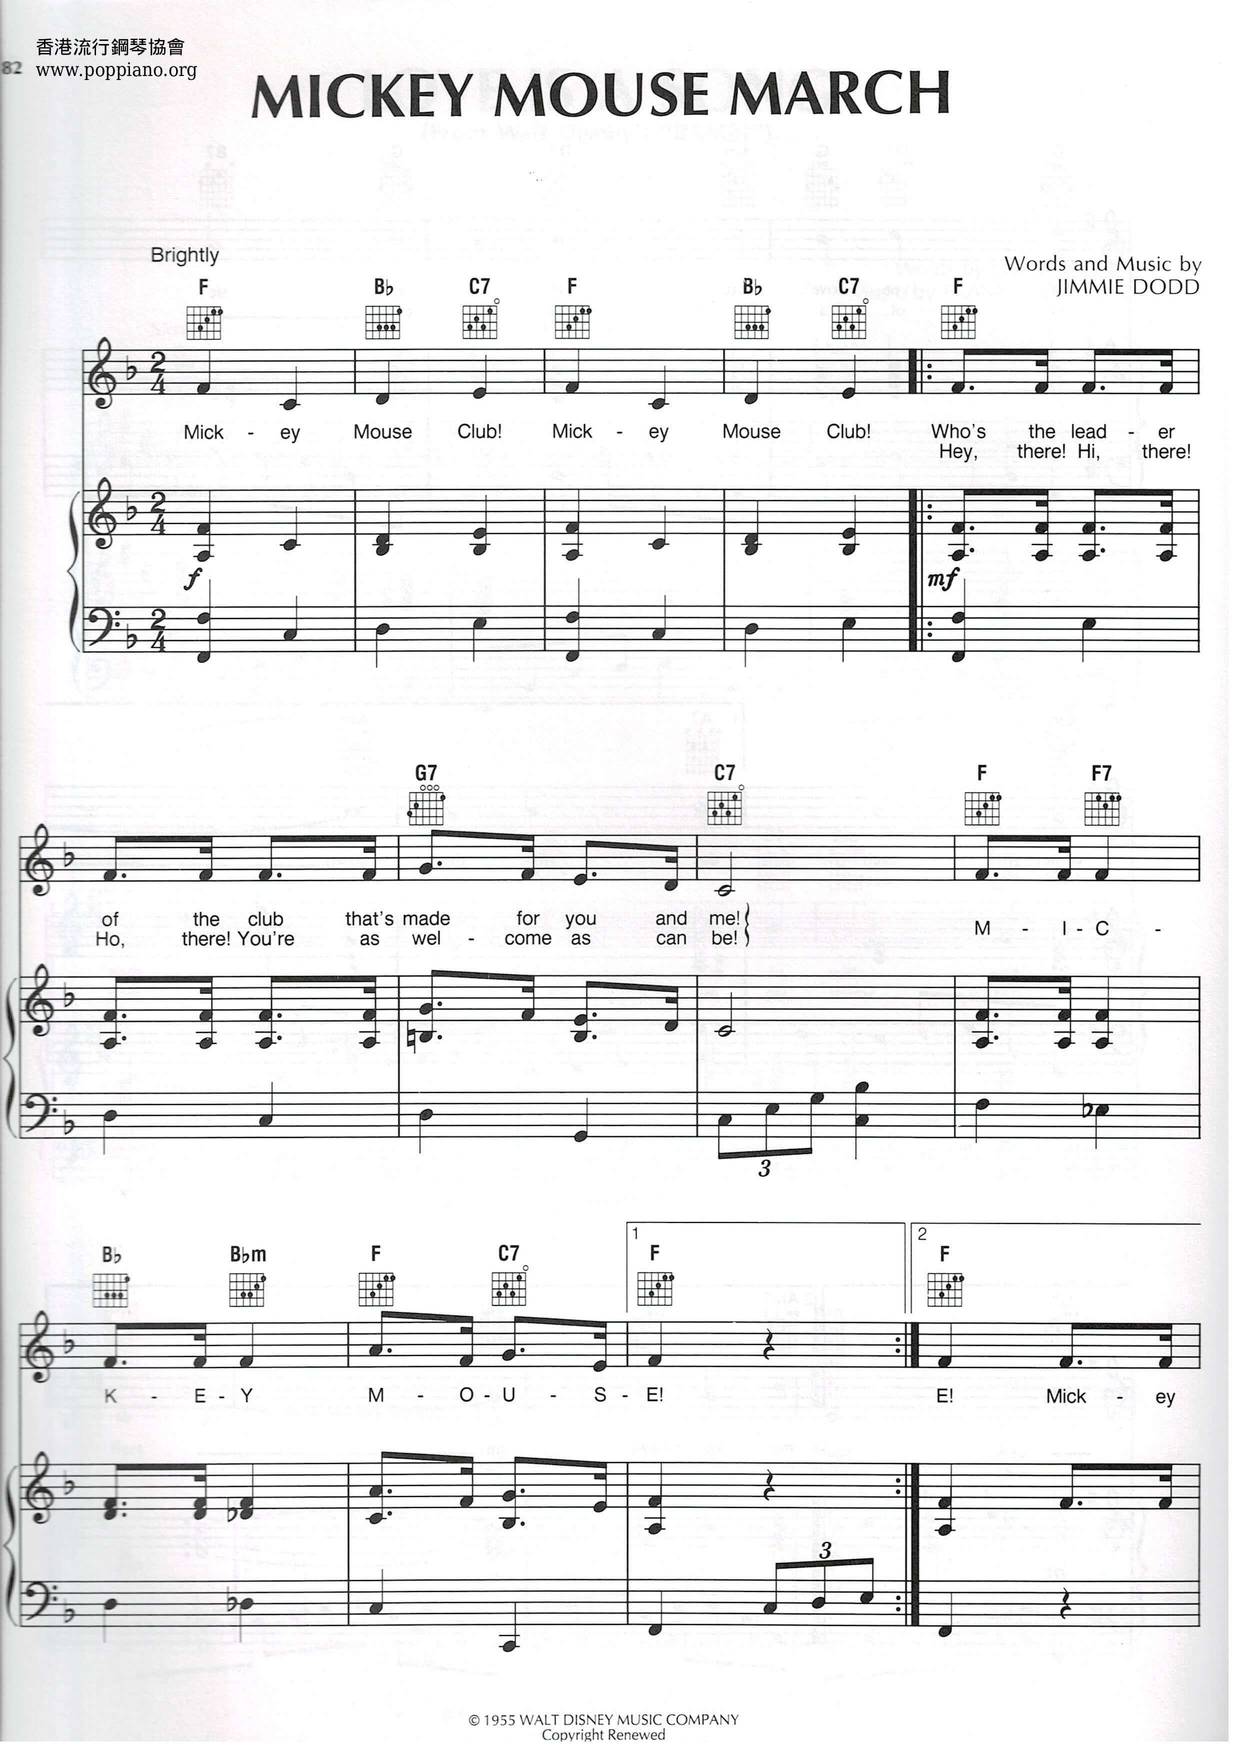 Jimmie Dodo Mickey Mouse March Sheet Music Pdf ミッキーマウスマーチ 楽譜 Free Score Download